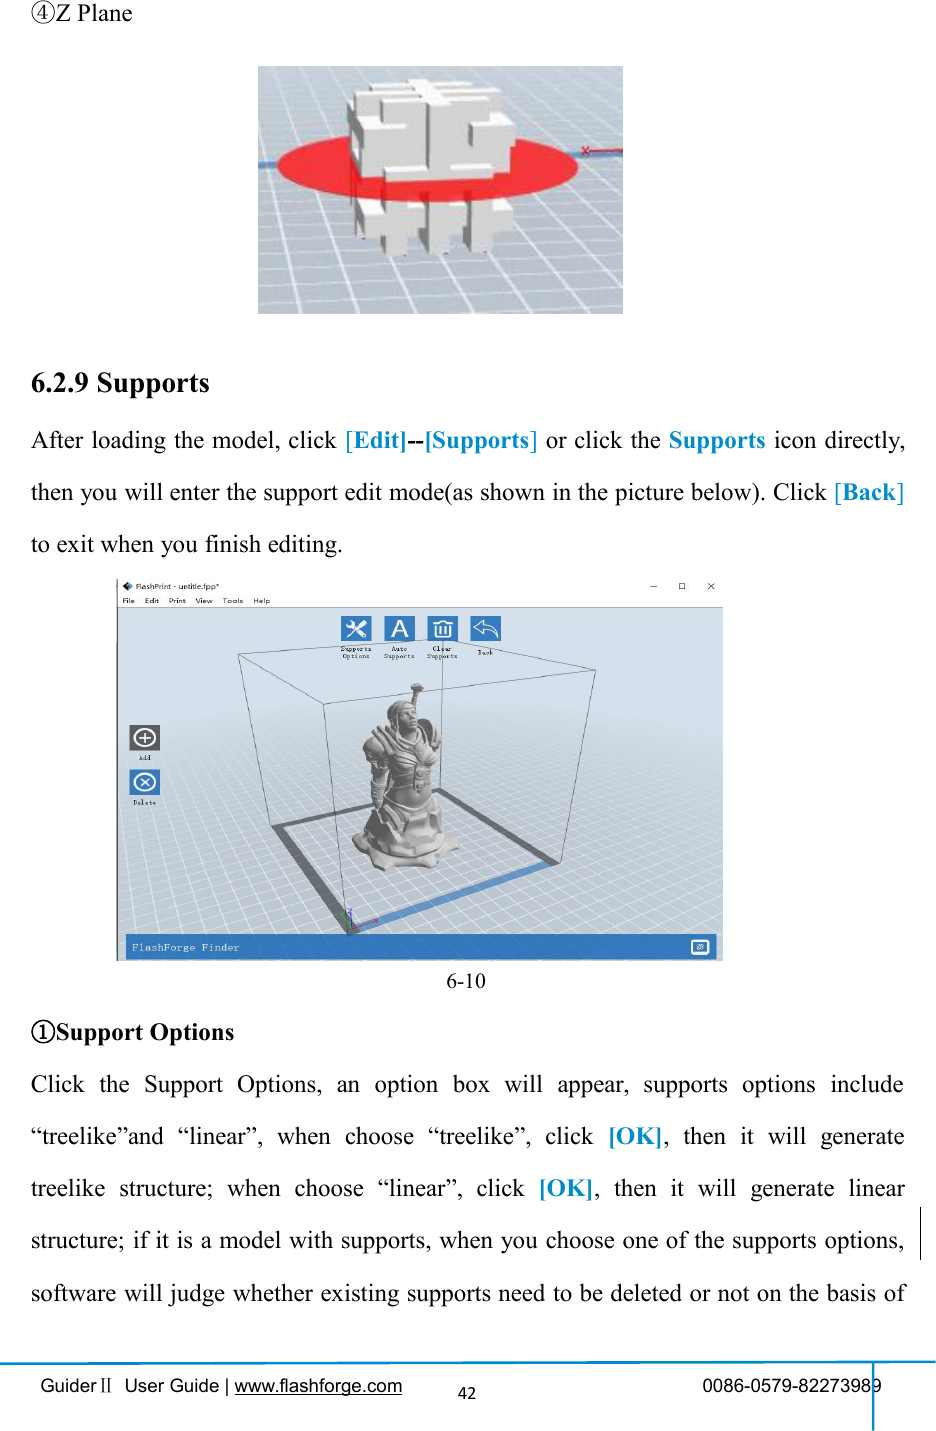 GuiderⅡUser Guide | www.flashforge.com 0086-0579-8227398942④Z Plane6.2.9 SupportsAfter loading the model, click [Edit]--[Supports]or click the Supports icon directly,then you will enter the support edit mode(as shown in the picture below). Click [Back]to exit when you finish editing.6-10①Support OptionsClick the Support Options, an option box will appear, supports options include“treelike”and “linear”, when choose “treelike”, click [OK], then it will generatetreelike structure; when choose “linear”, click [OK], then it will generate linearstructure; if it is a model with supports, when you choose one of the supports options,software will judge whether existing supports need to be deleted or not on the basis of